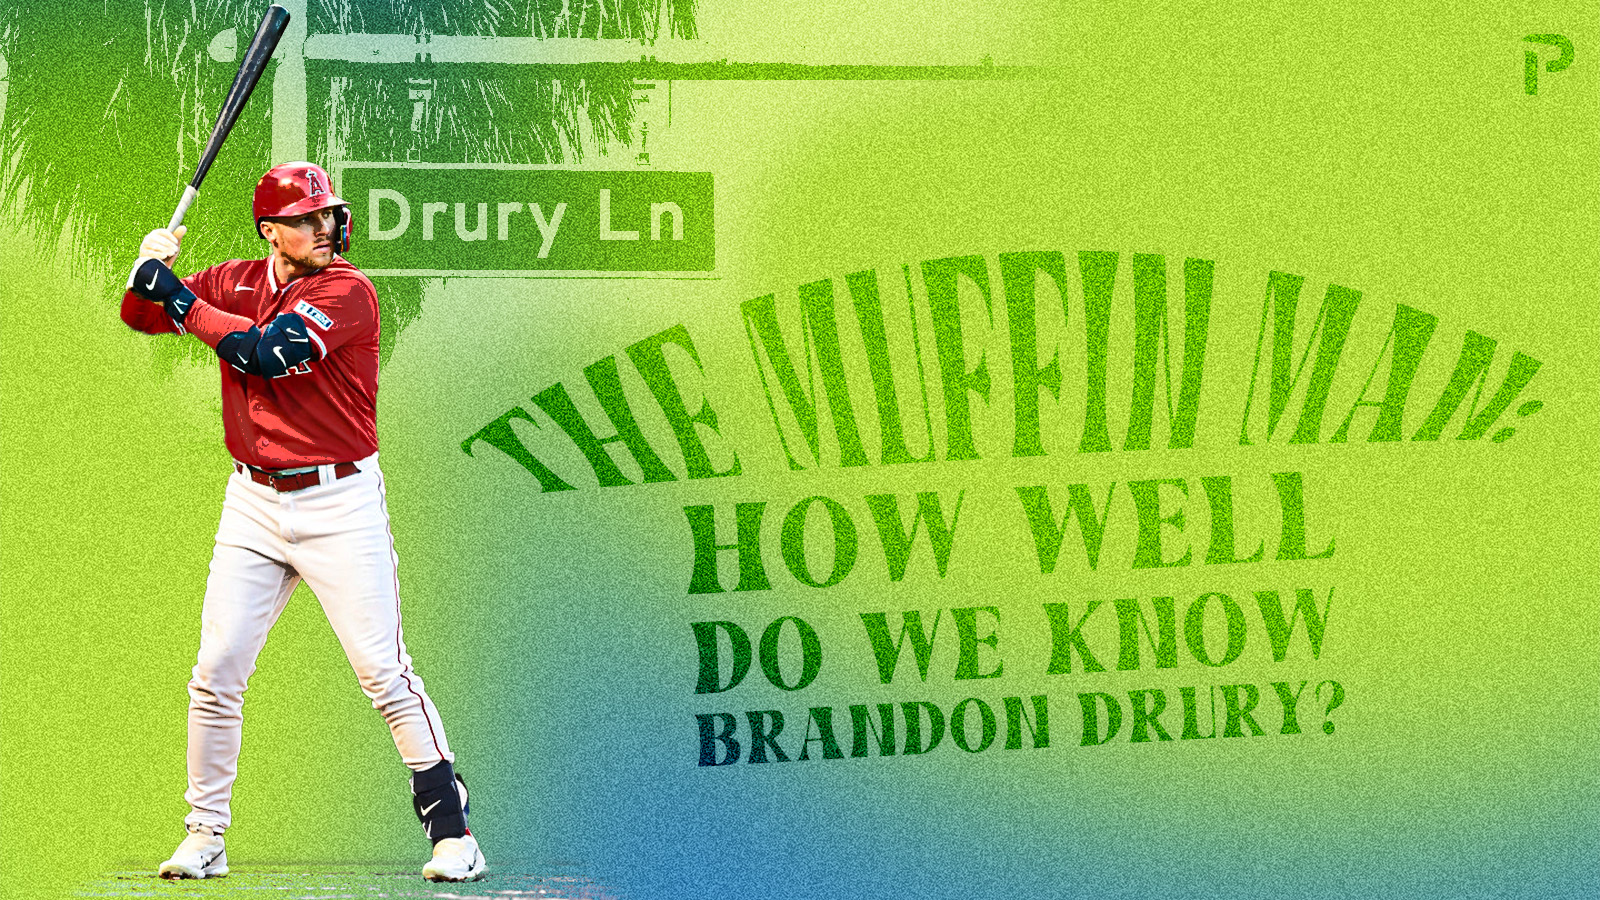 The Muffin Man: How Well Do We Know Brandon Drury?